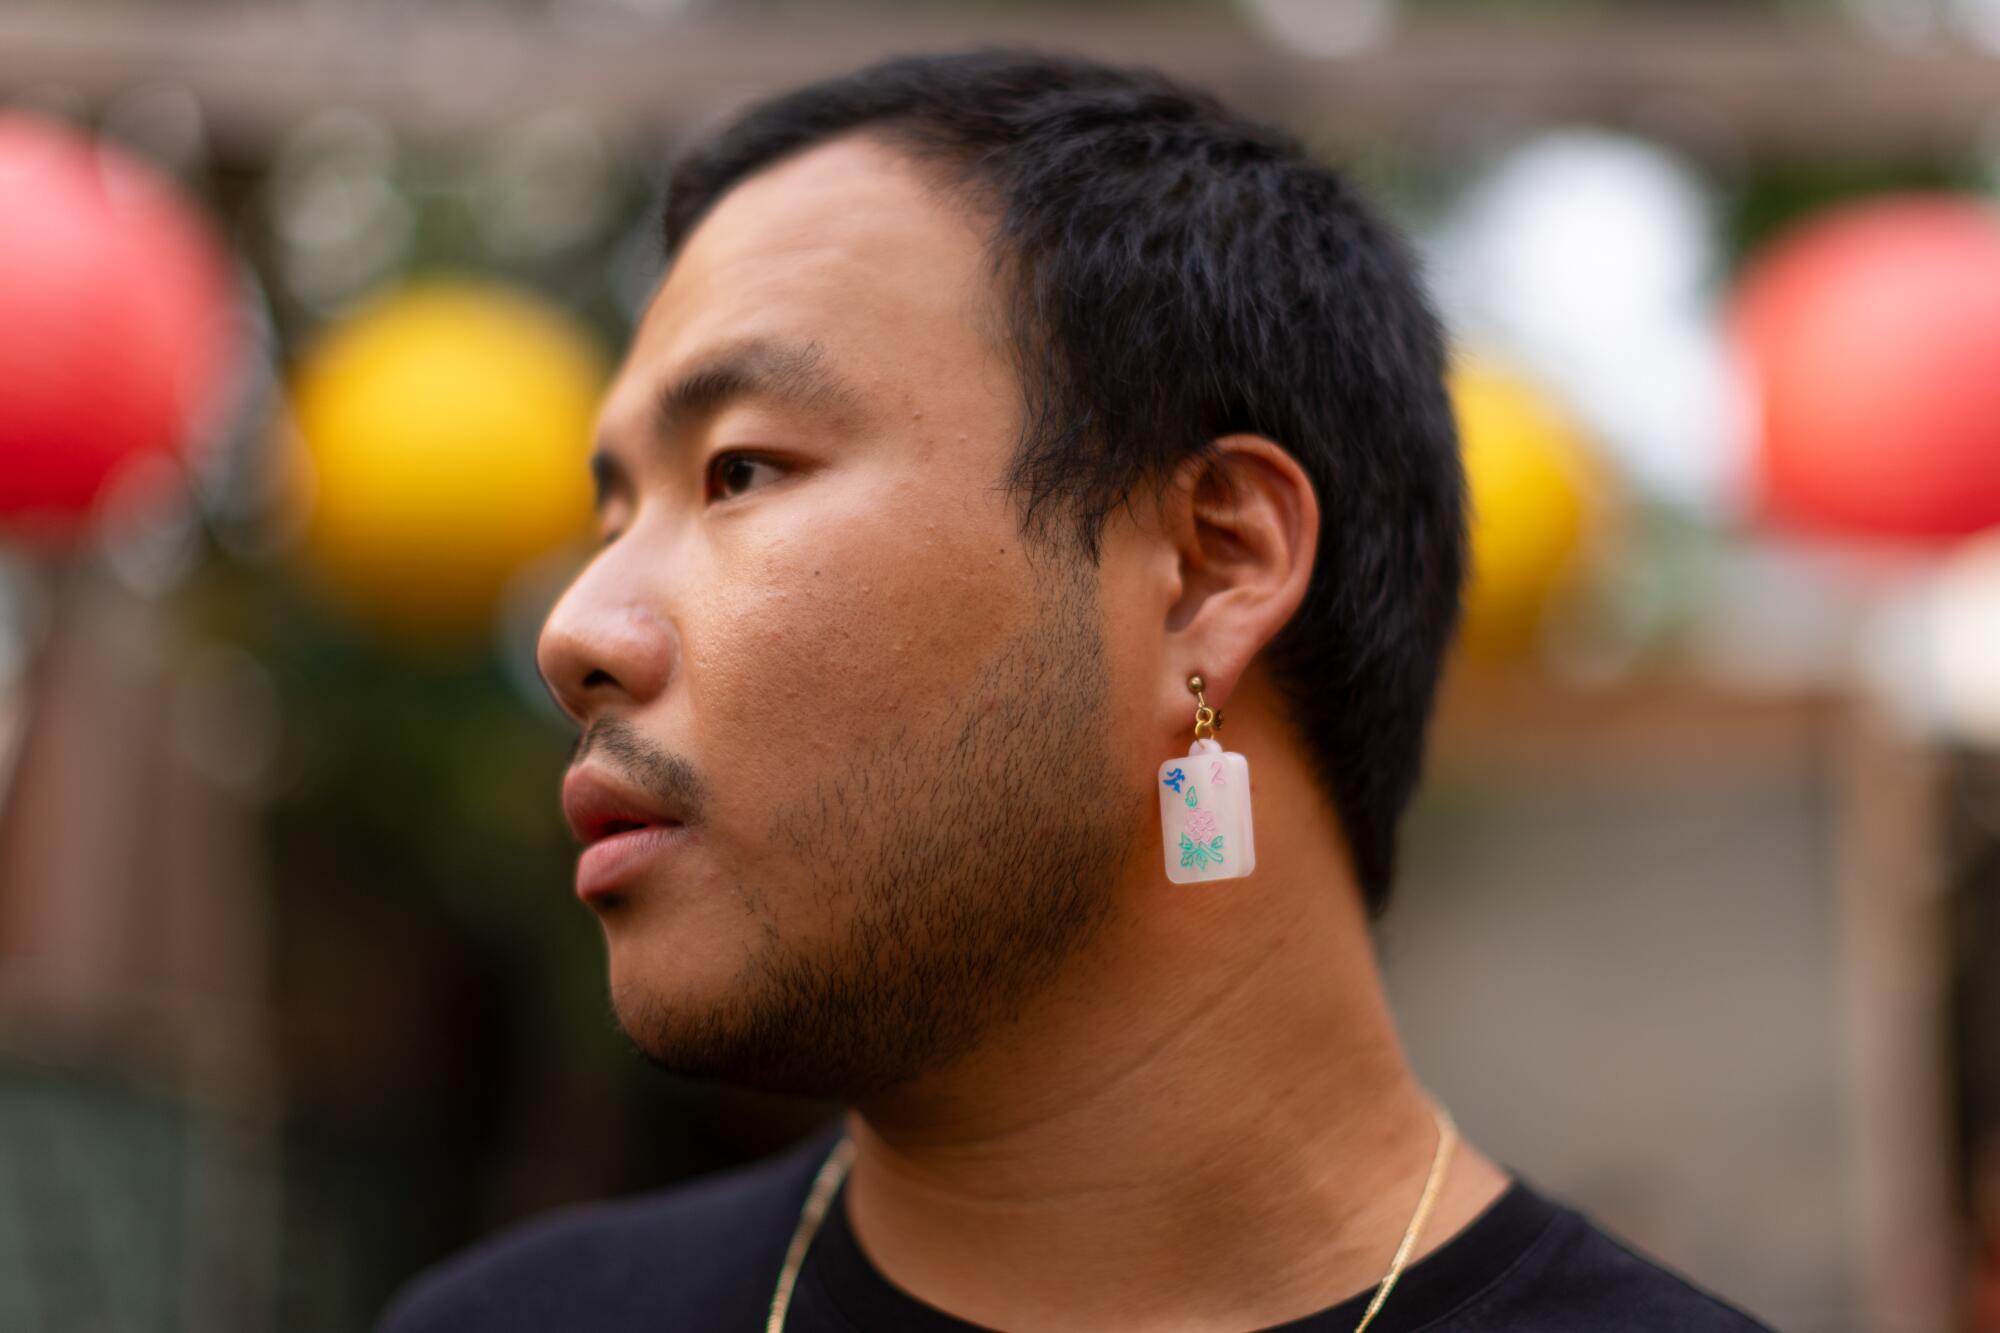 A person wears a mah-jongg-inspired earring that looks like a white tile  with blue, pink and green flower engravings.